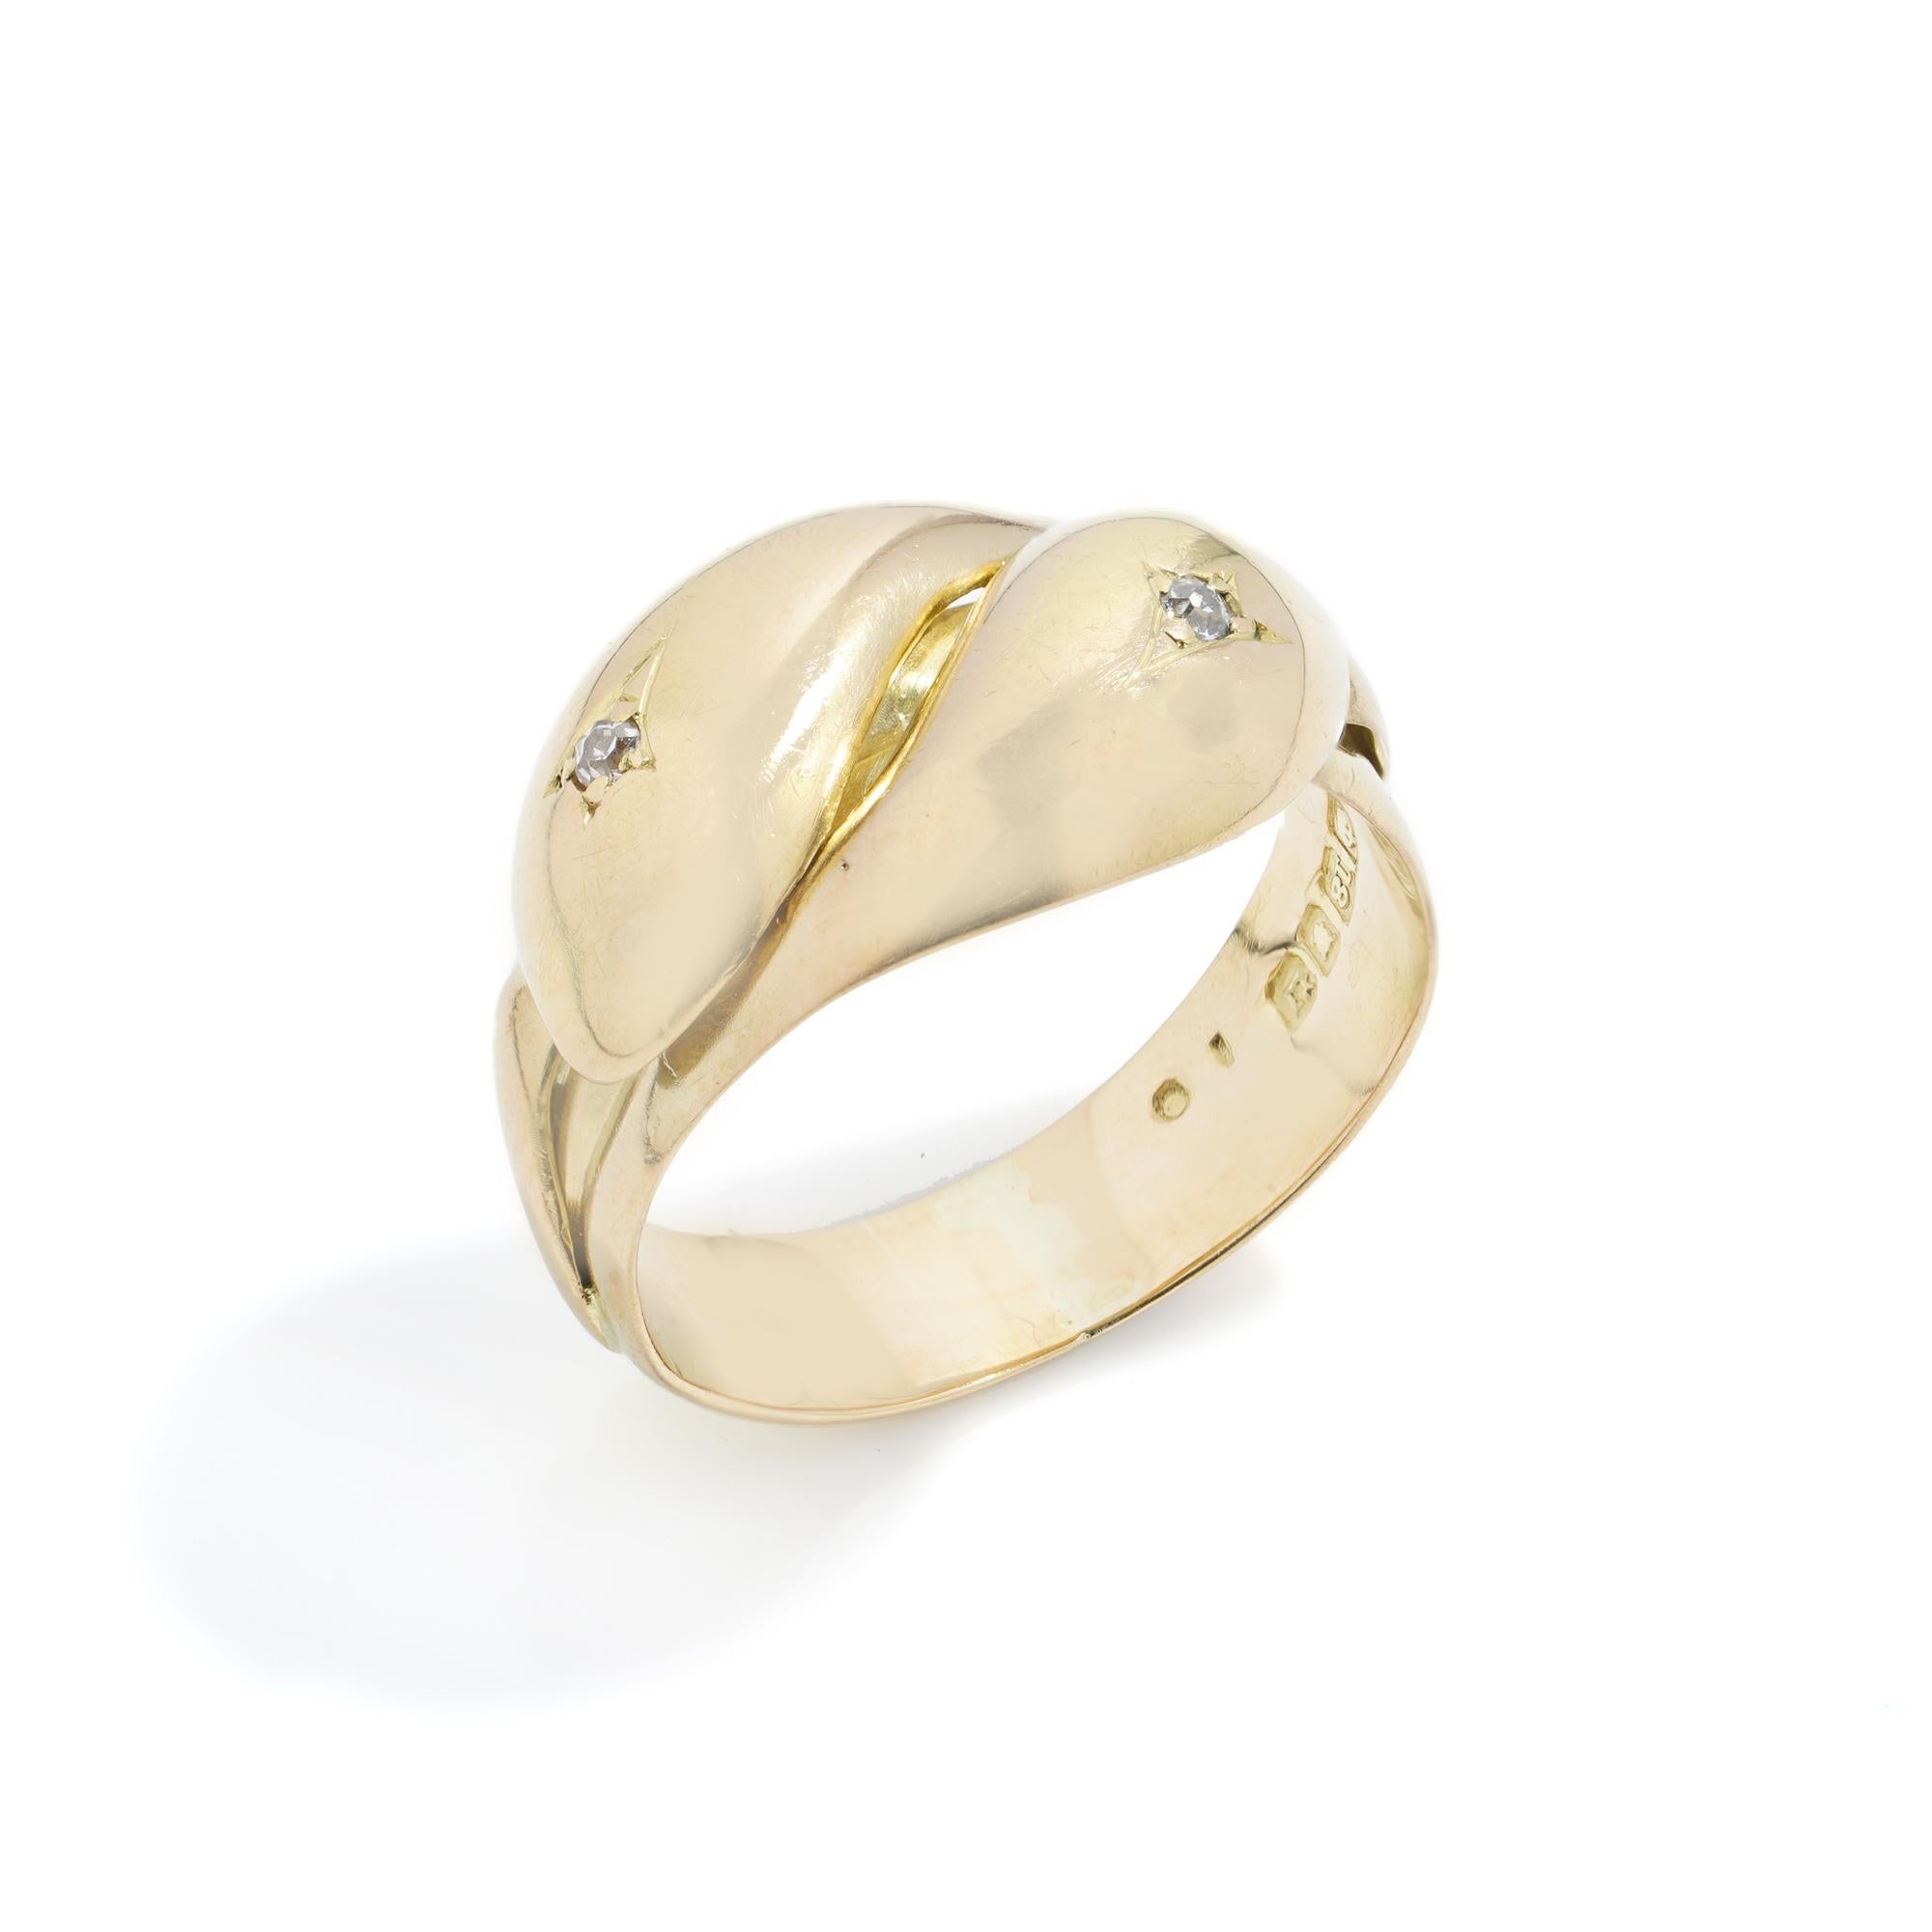 Antique Victorian 18kt yellow gold double serpent band ring set with  0.06 ct. diamonds. 
Made in England, Sheffield, 1895
Fully hallmarked. 

Dimensions - 
Finger Size (UK) = R (EU) = 58 1/2 (US) = 8 3/4
Weight: 7.00 grams

Diamonds - 
Cut: Old-cut